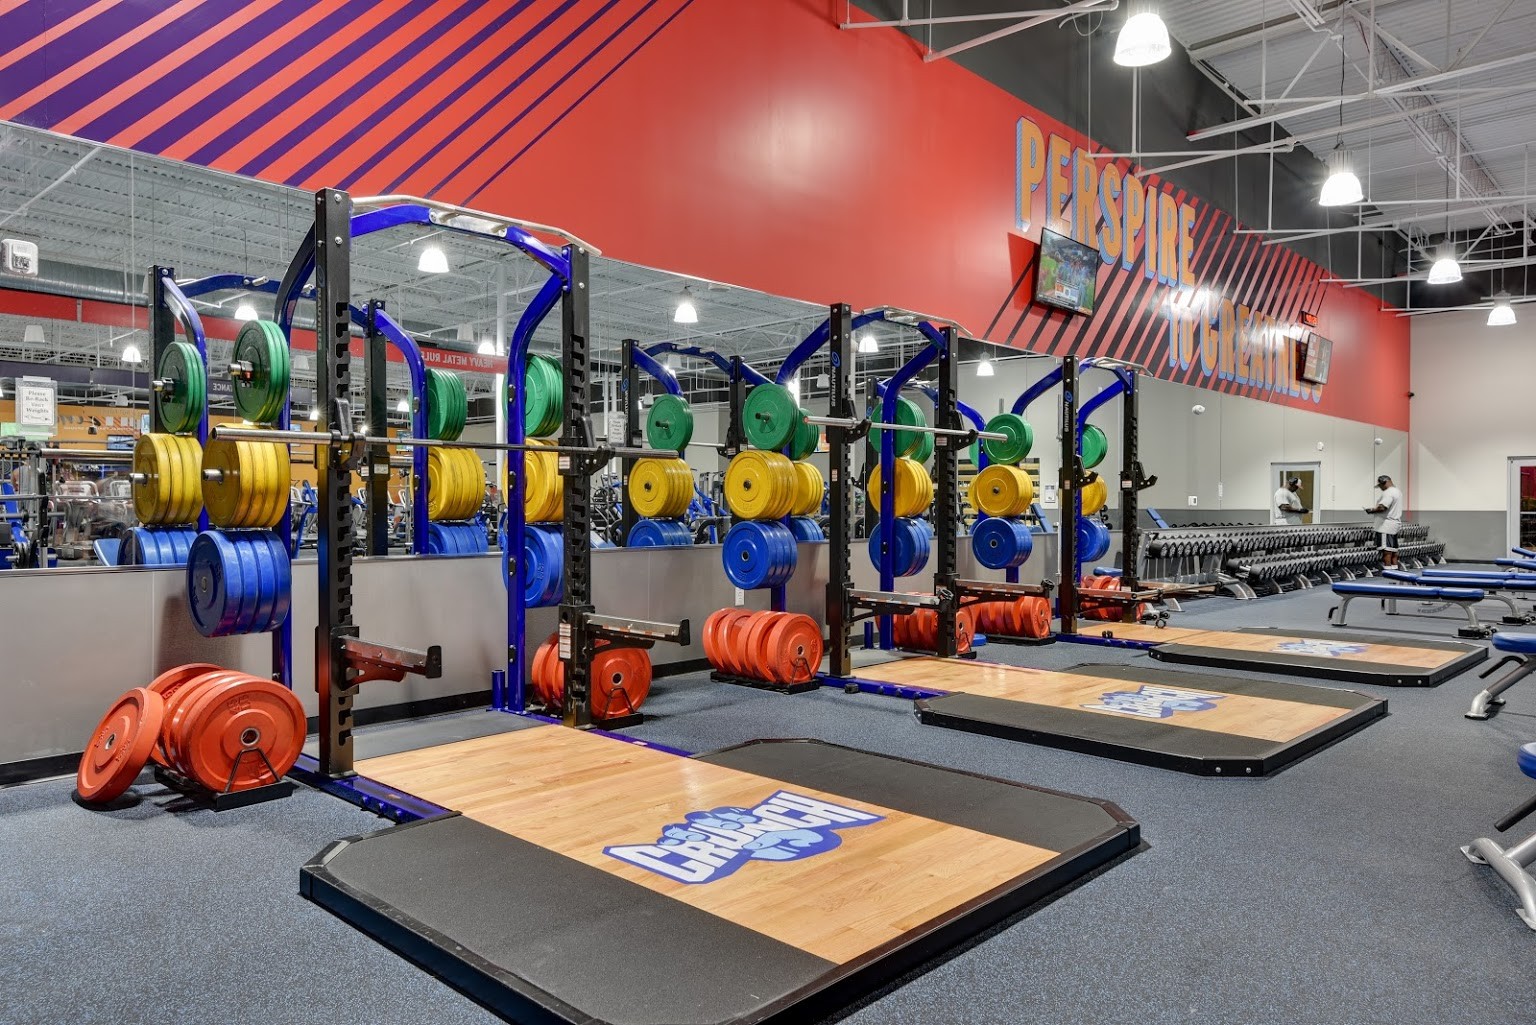 Crunch Fitness gym in Raleigh, NC – Google Business View